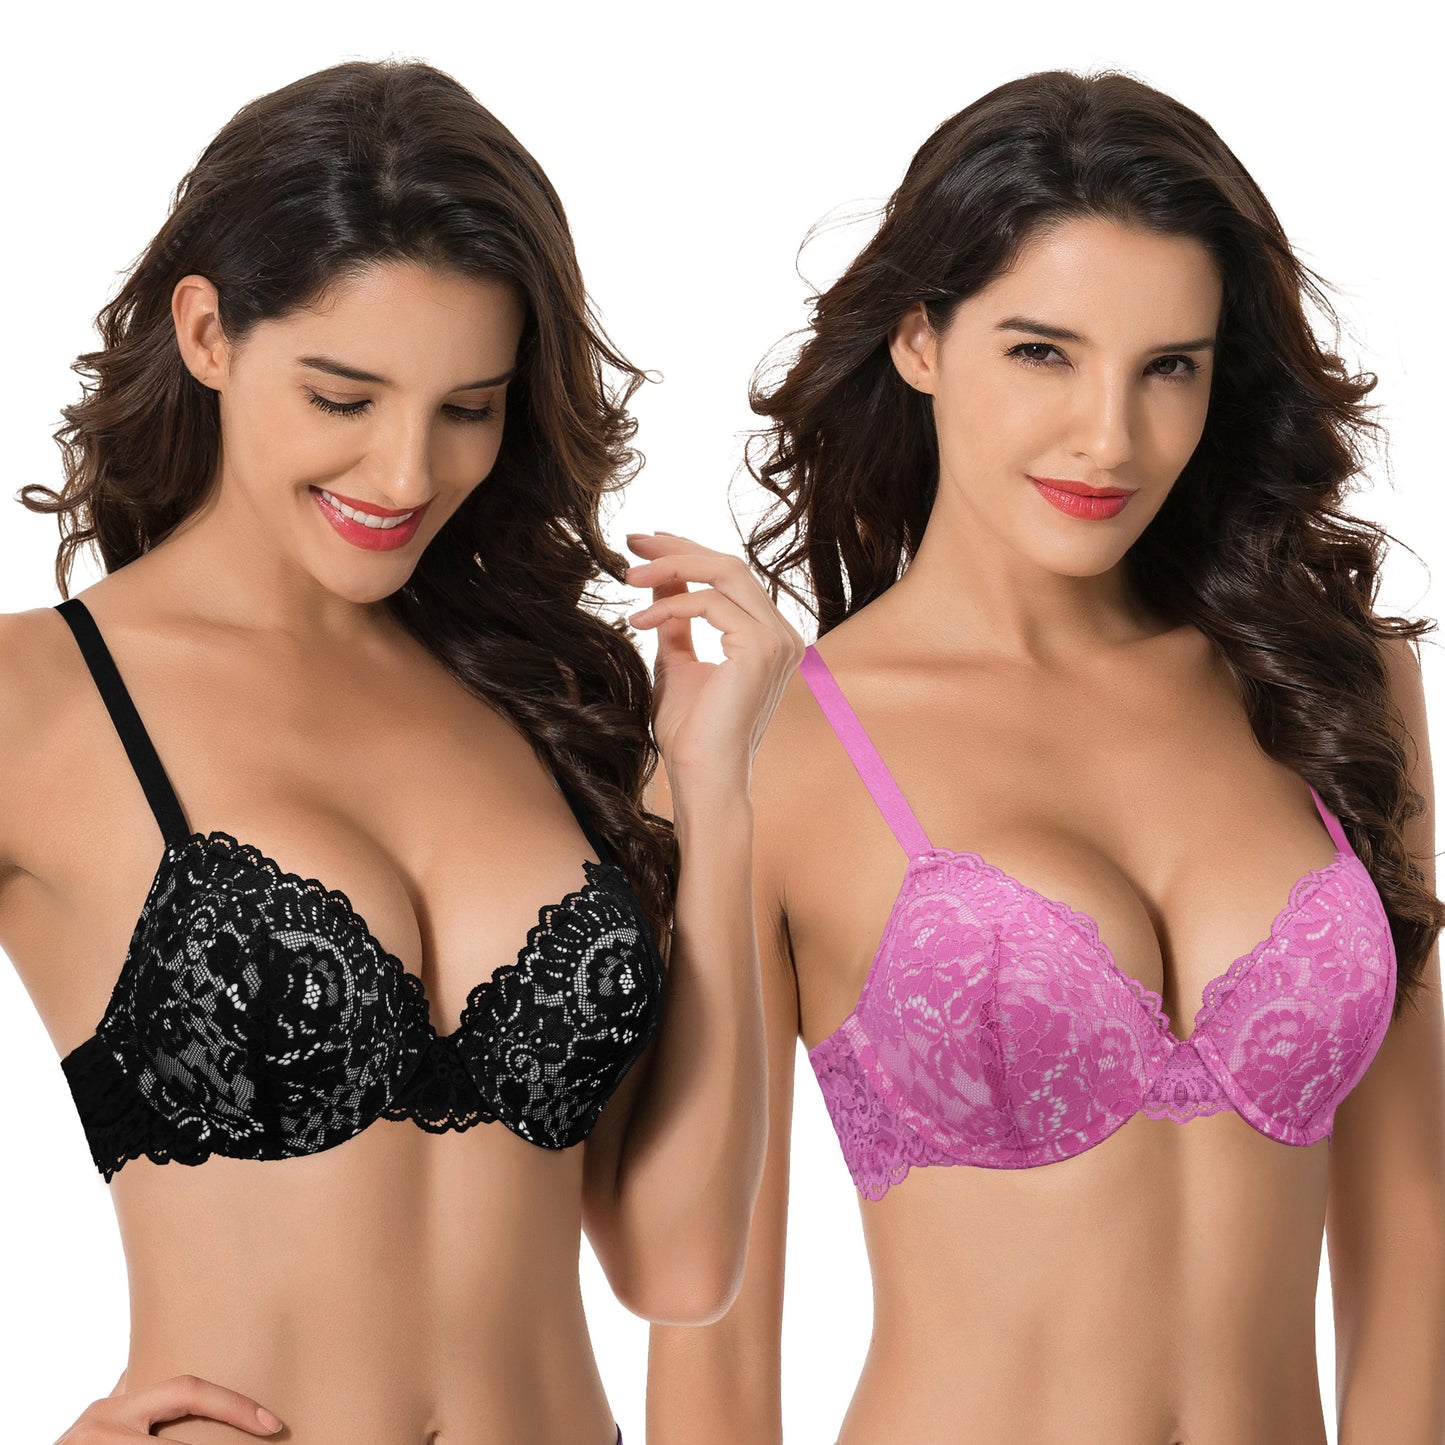 Women's Underwire Plus Size Push Up Add 1 and a Half Cup Lace Bras-2PK-Hot Pink,Black